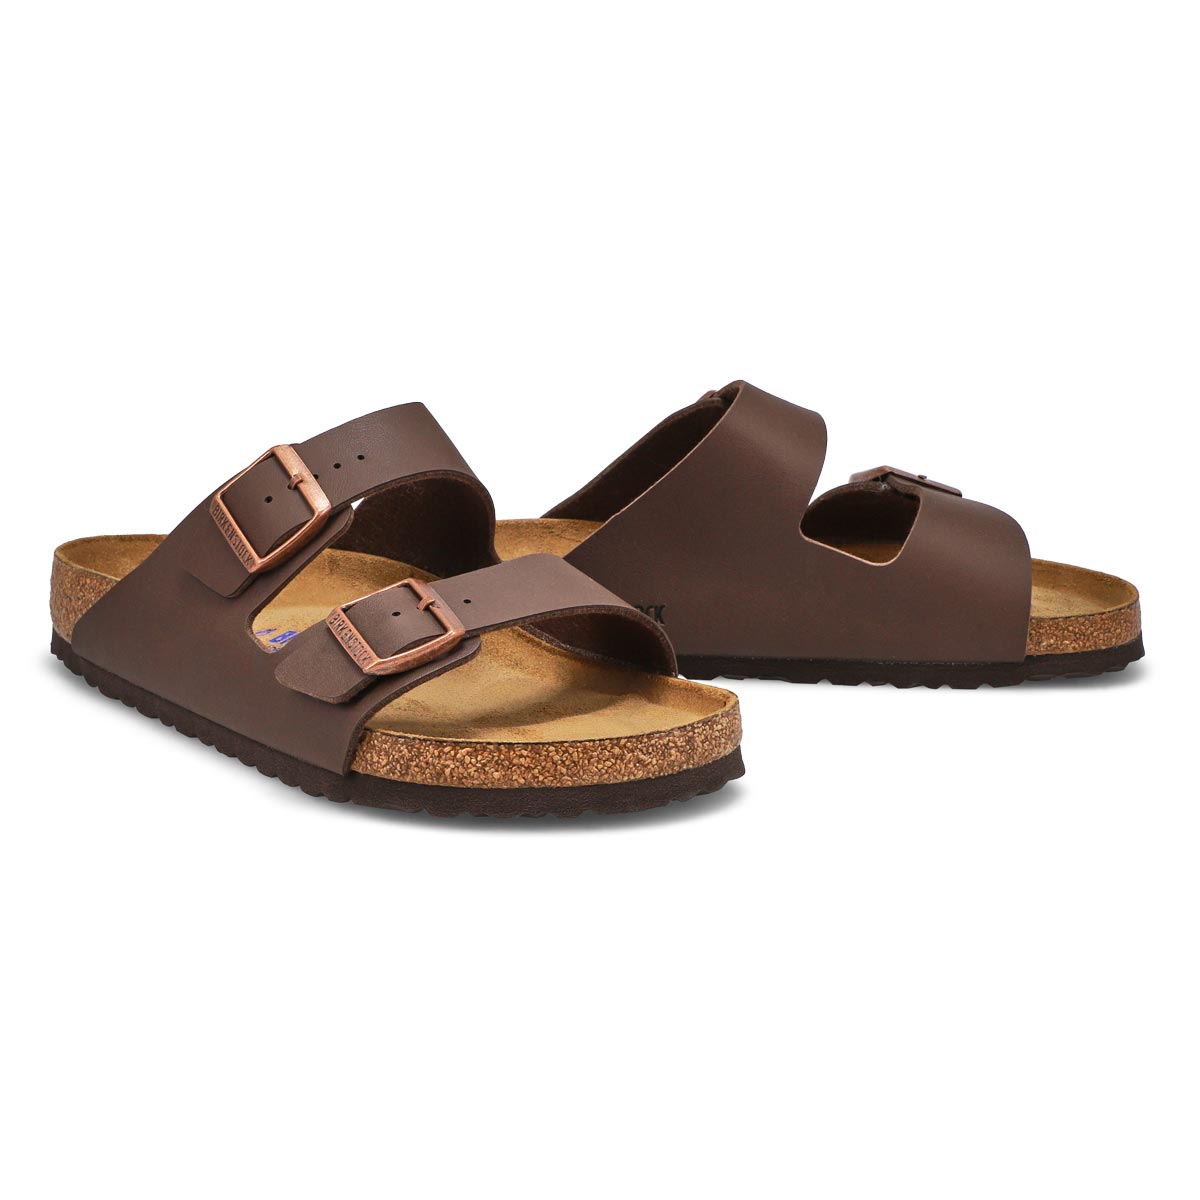 The Complete Guide To Birkenstock Sandals: All Styles,